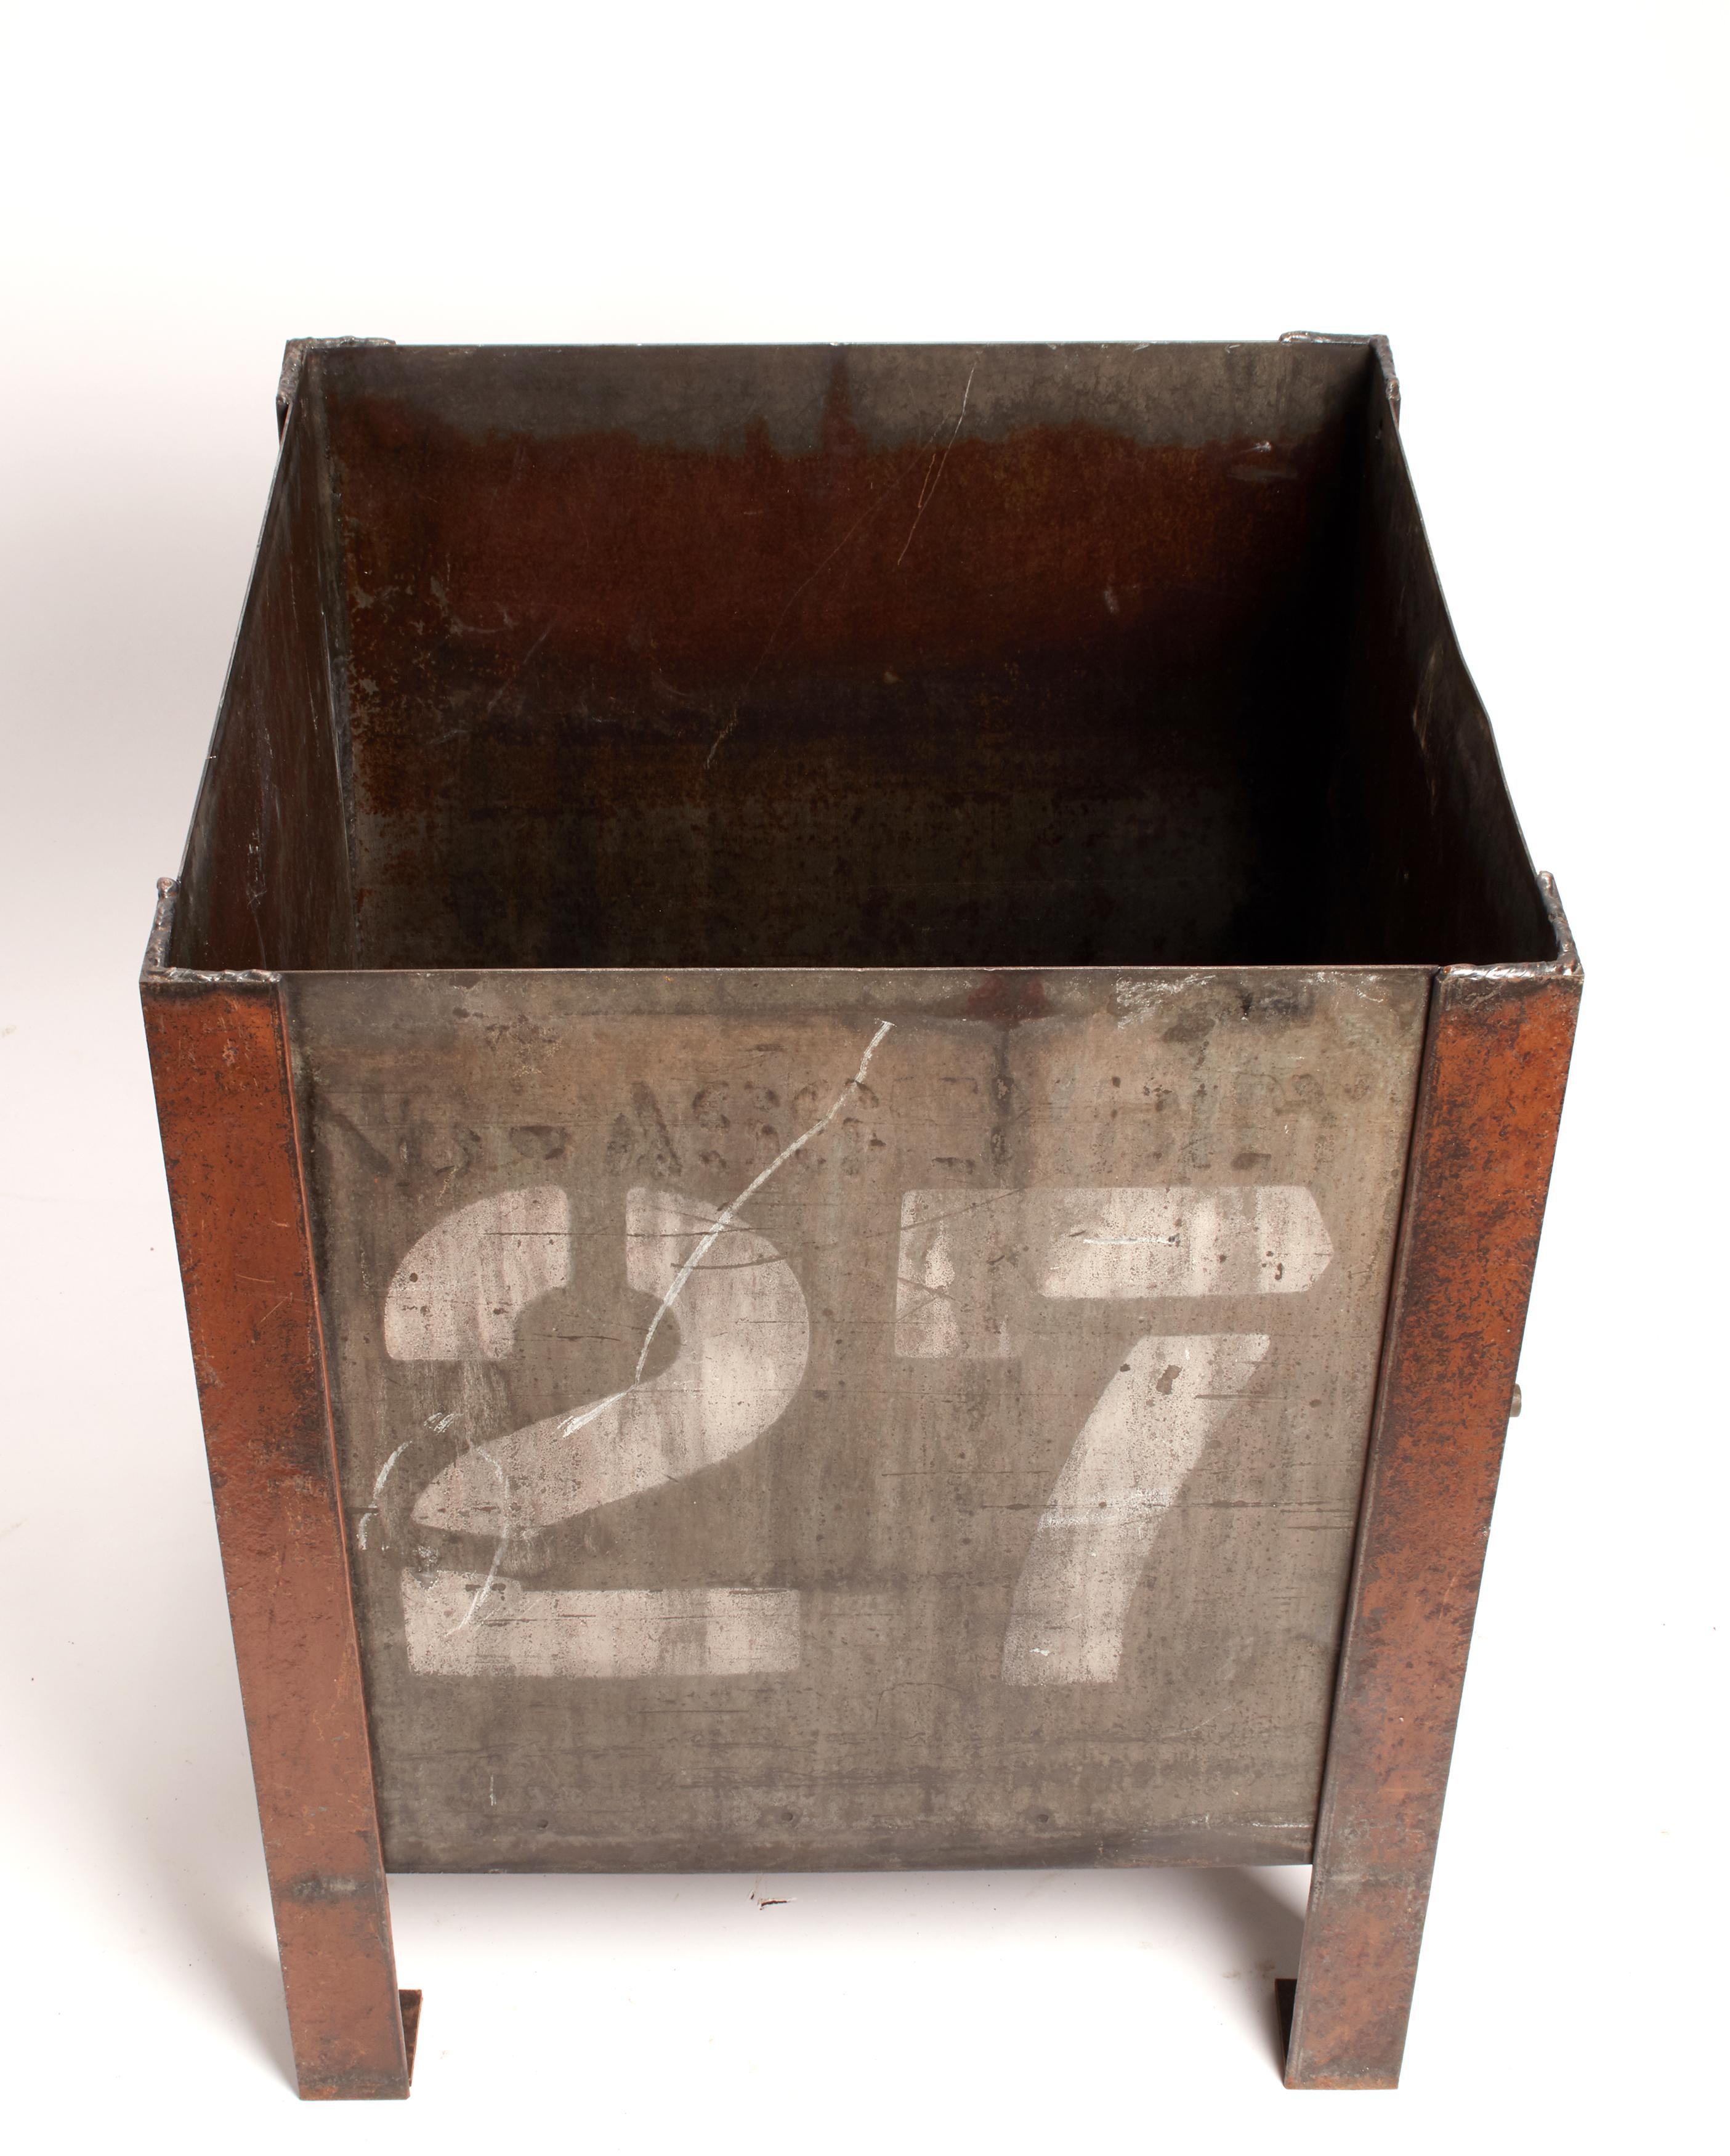 North American Pair of Industrial Oil Containers, USA, 1900